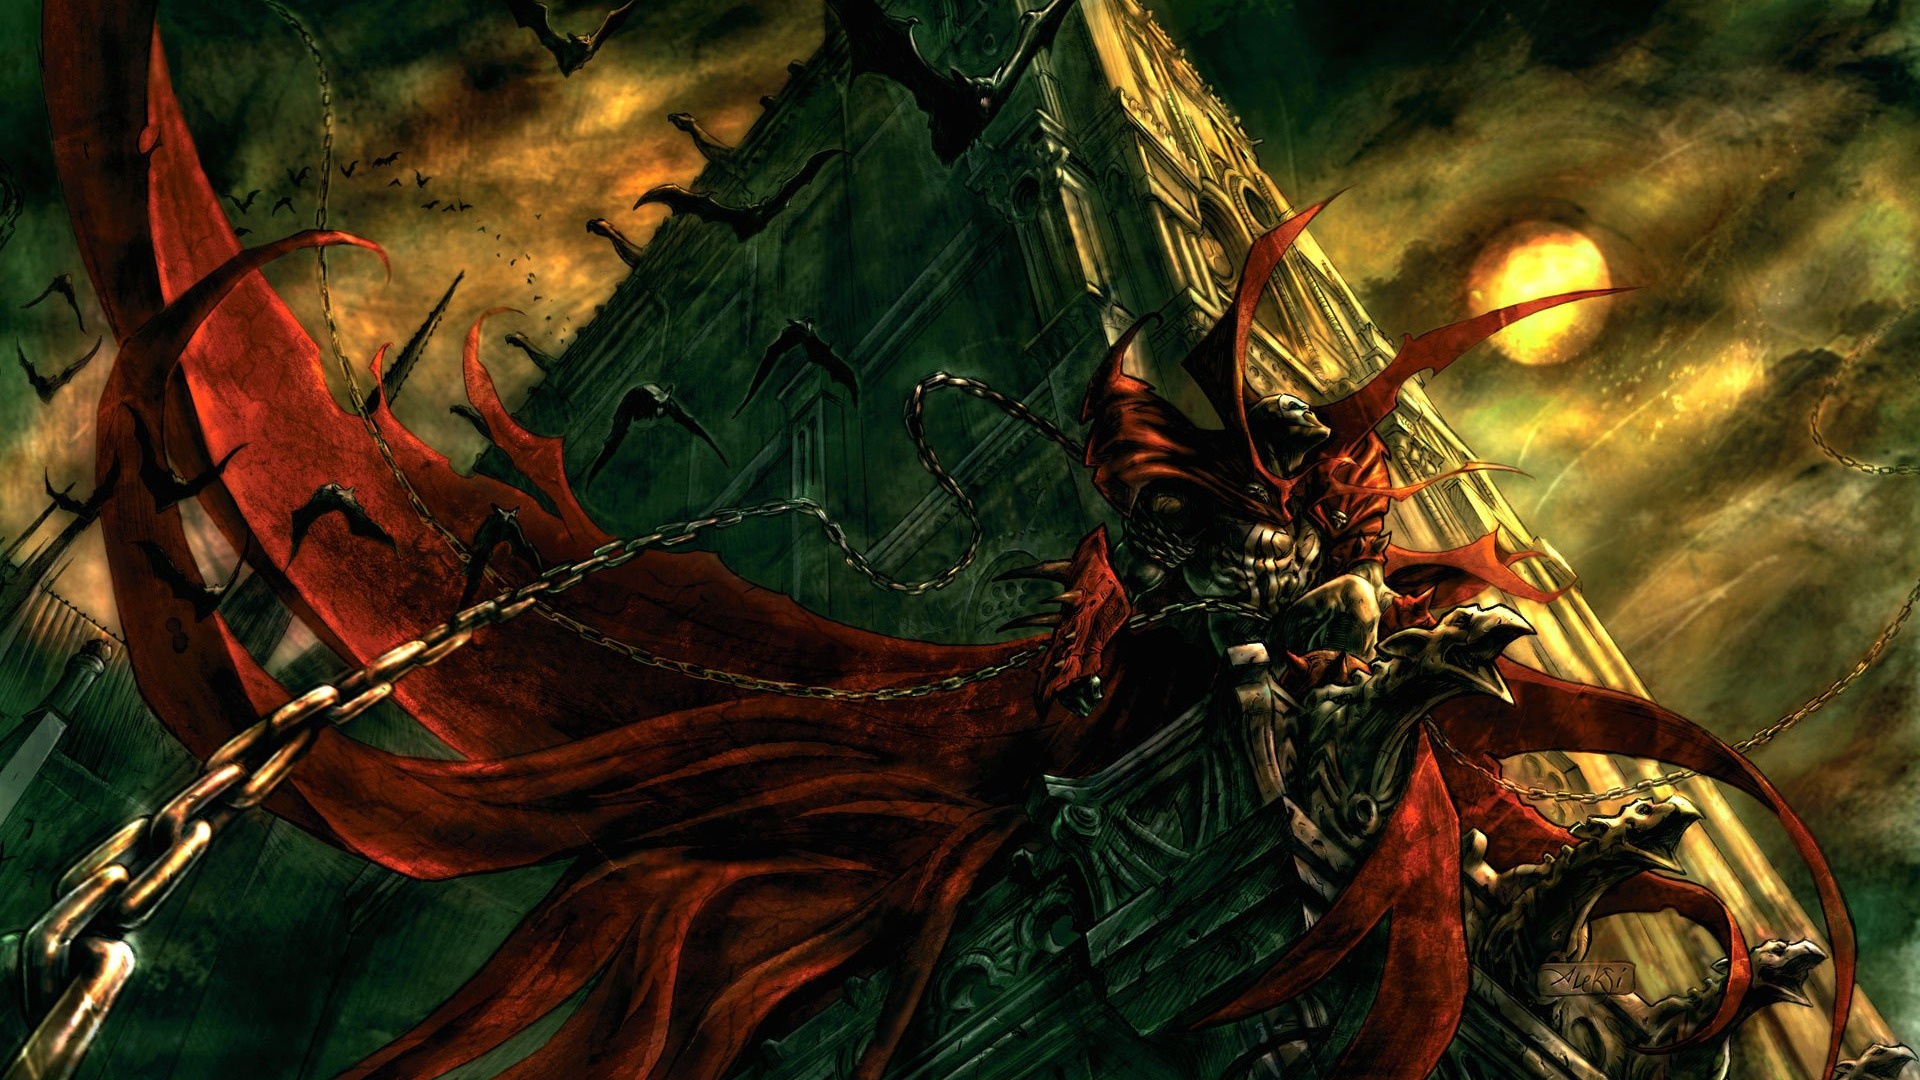 Spawn HD Wallpapers #18 - 1920x1080